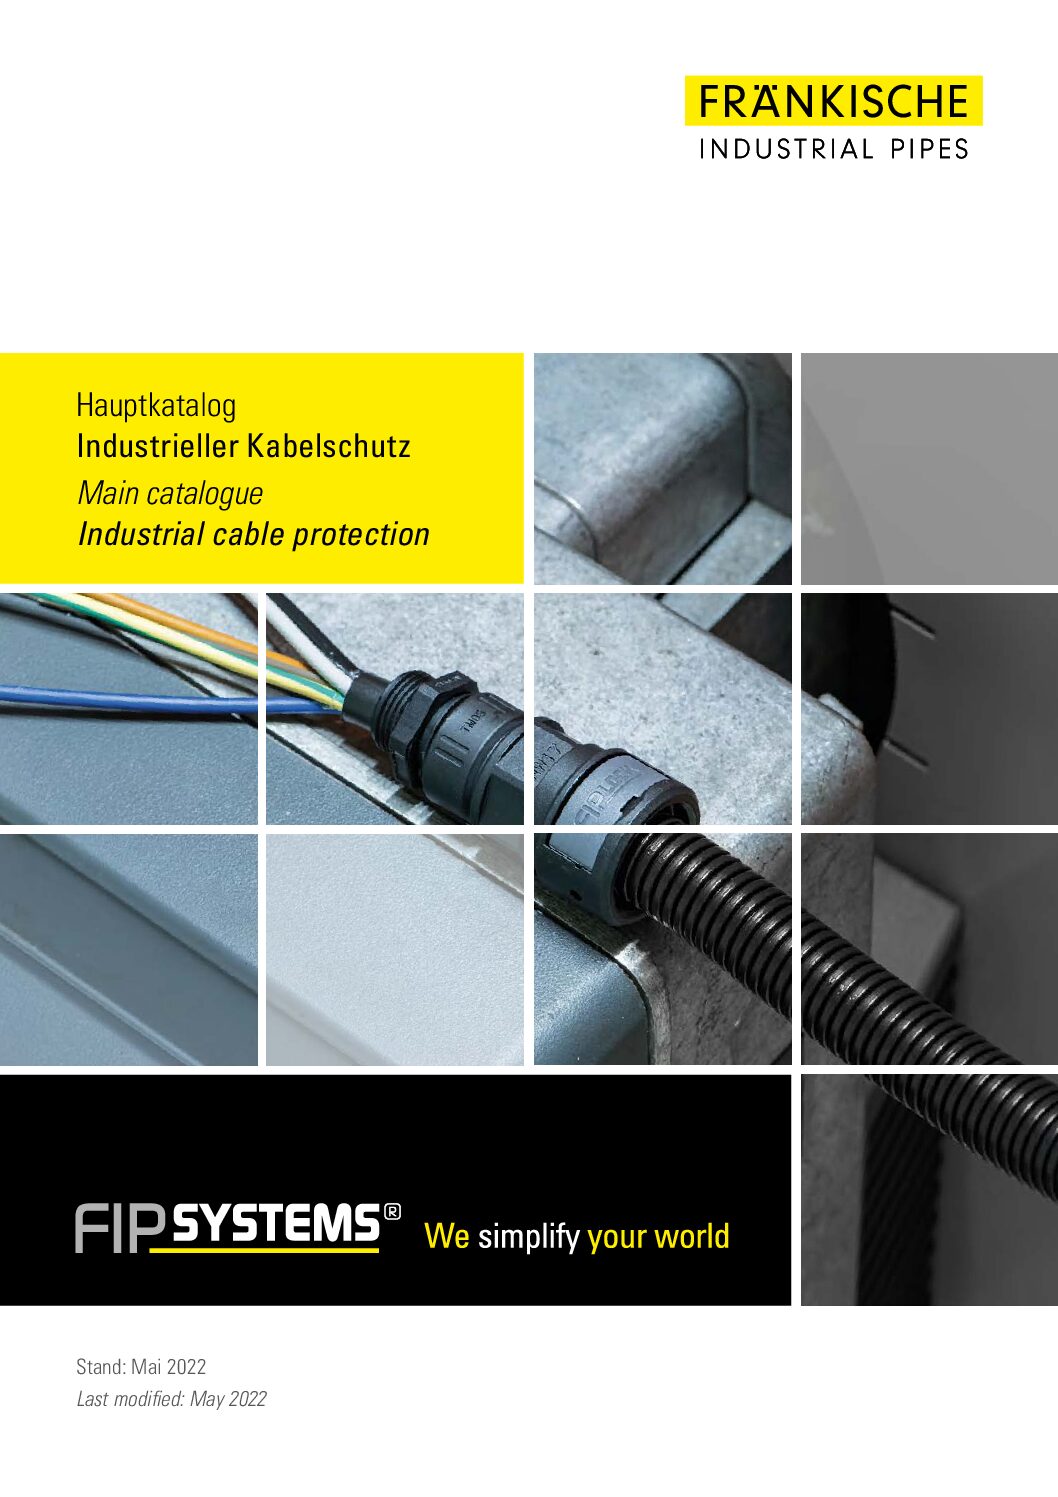 FIPSYSTEMS® Catalogue: Industrial Cable Protection